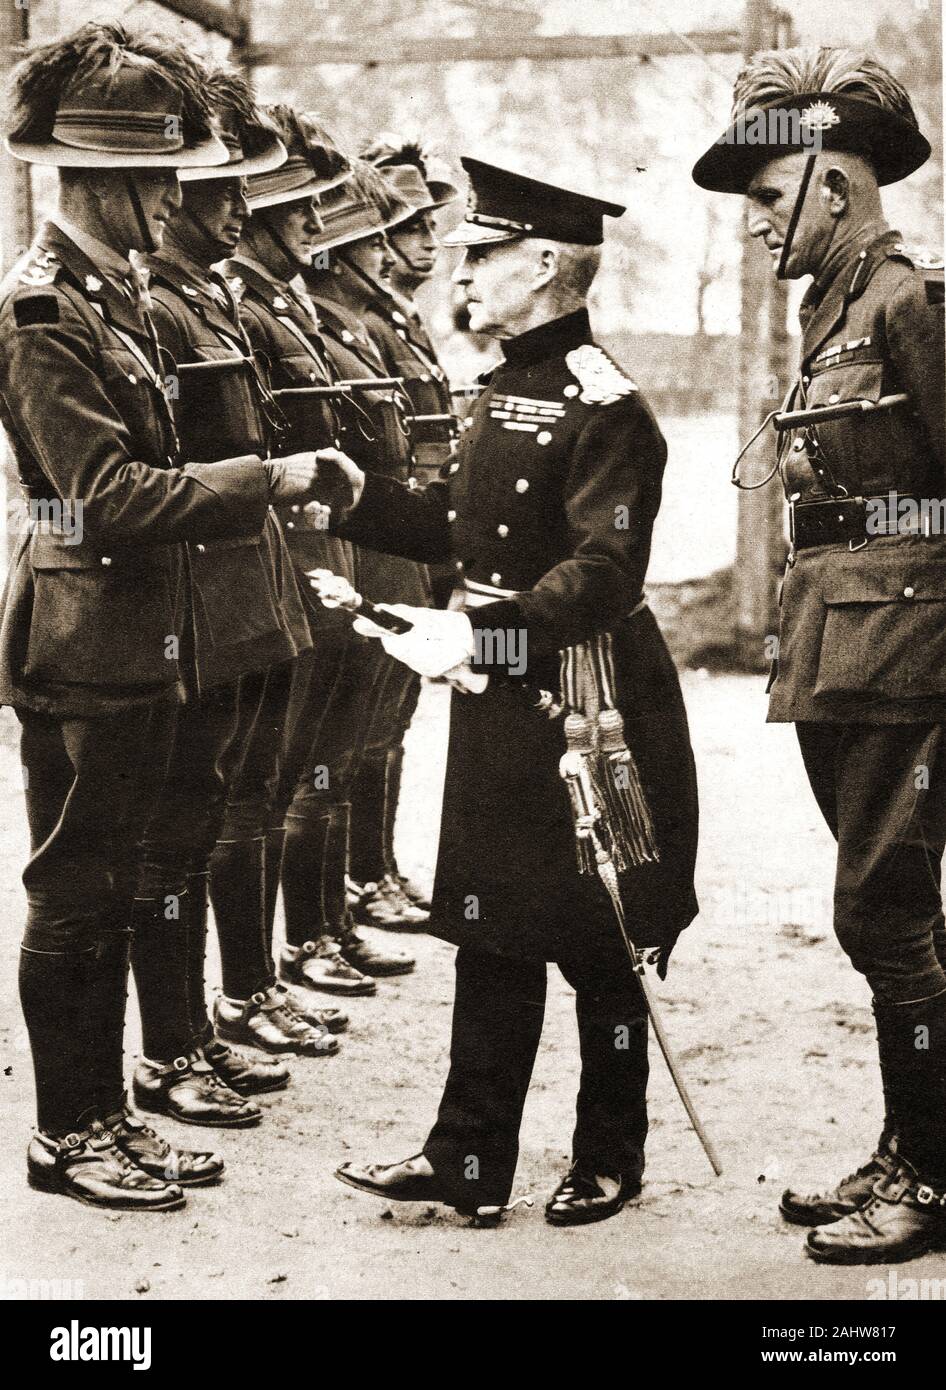 May 8th 1937. Field Marshal Lord Caven ( Frederick Rudolph Lambart 1865-1946)  shakes hands with Colonel Barker at Pirbright Camp,   - The  Australian colonel Edmund Frank Lind (1888-1944) is behind him. Lord Cavan was previously known as Viscount Kilcoursie . Stock Photo